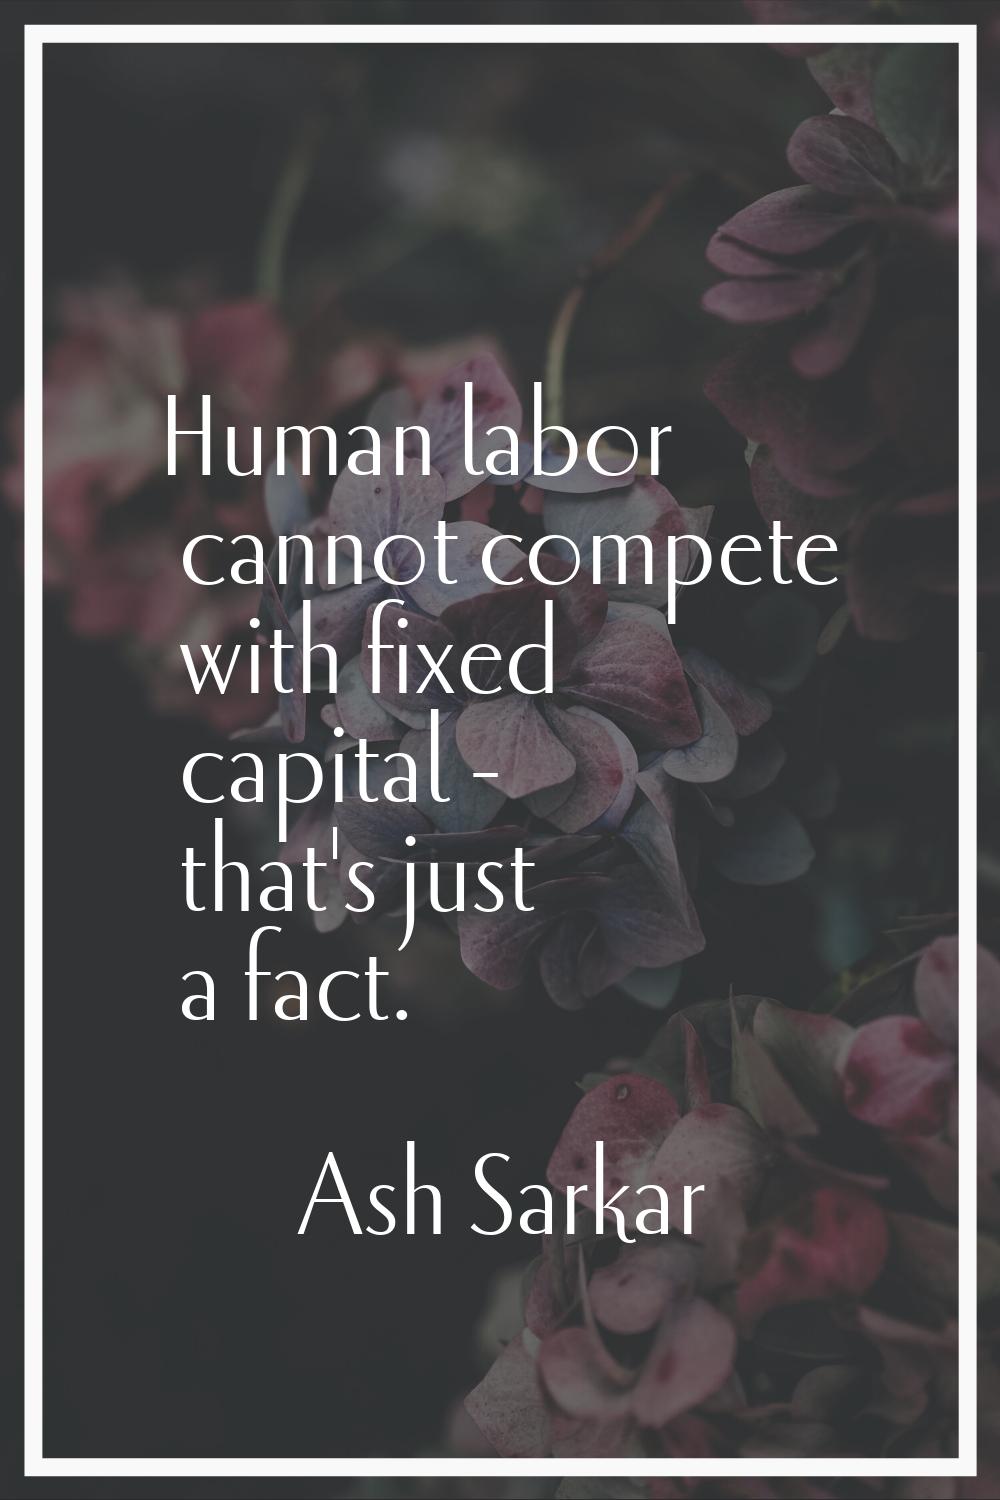 Human labor cannot compete with fixed capital - that's just a fact.